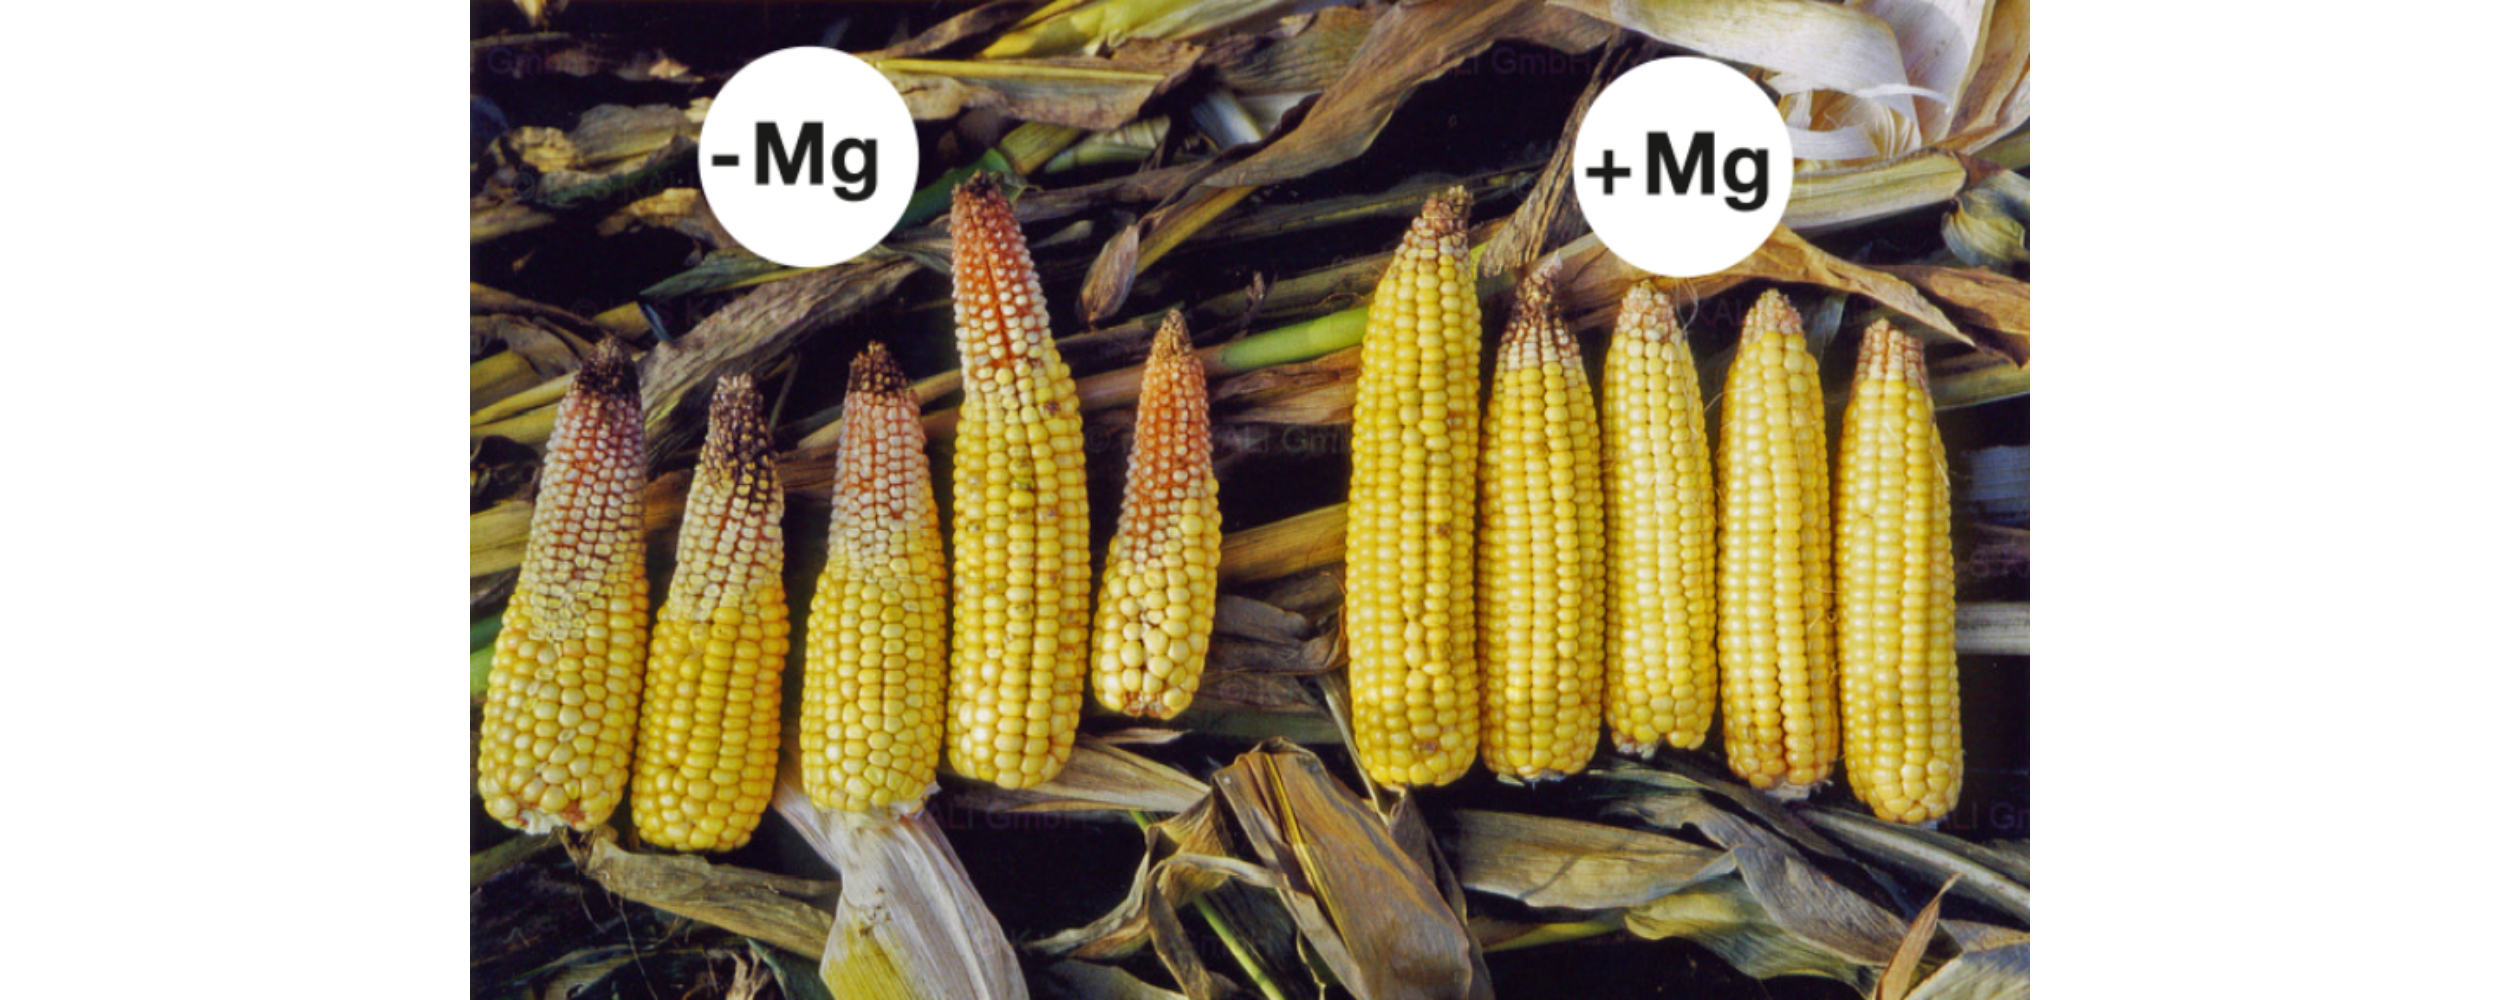 Magnesium promotes cob fullness in corn. Magnesium deficiency (left) causes some of the grain sites to die-off, because insufficient carbohydrates are transported to the cobs.